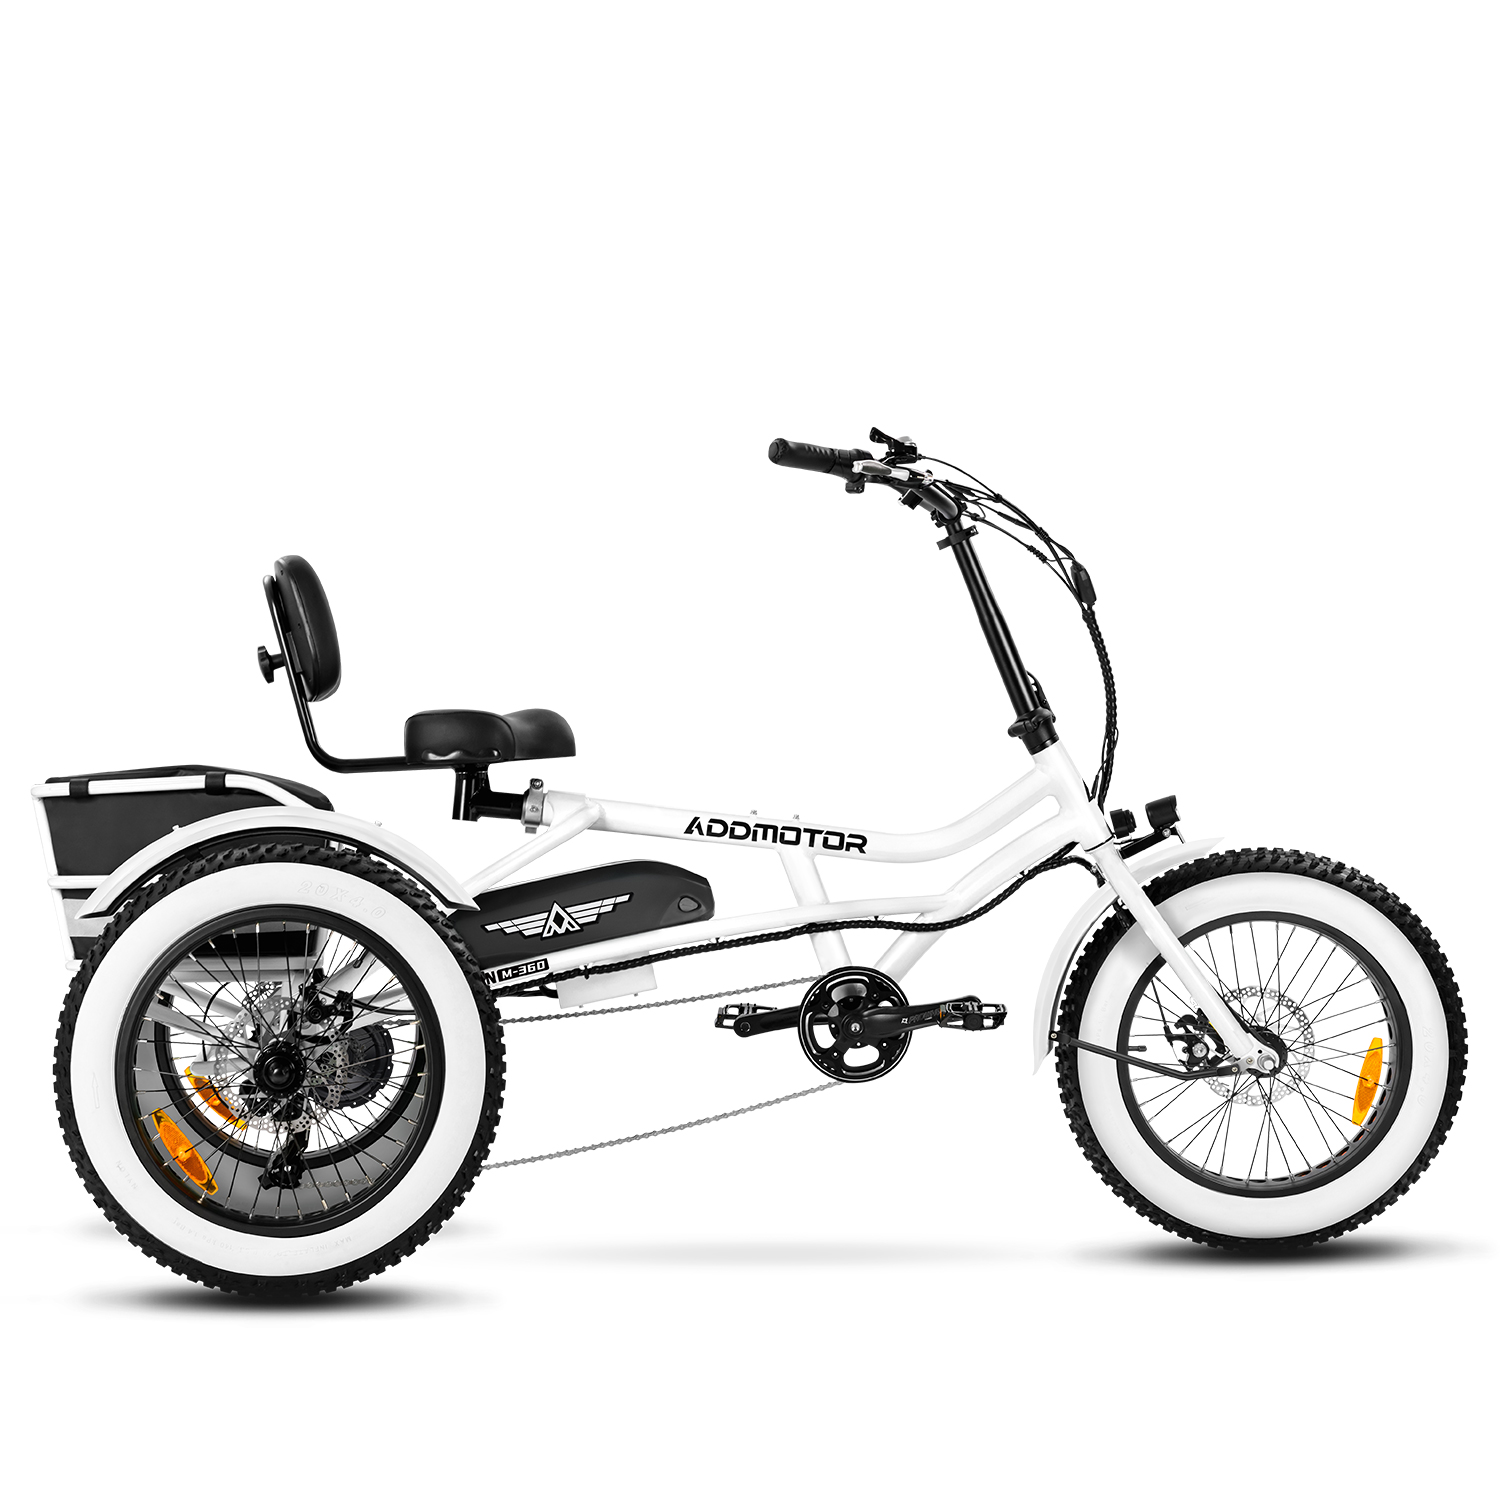 Addmotor Arisetan M-360 | Adult Semi-recumbent Electric Trike With 750W Rear Motor | Best Affordable Electric Tricycle for Seniors | Pearl White